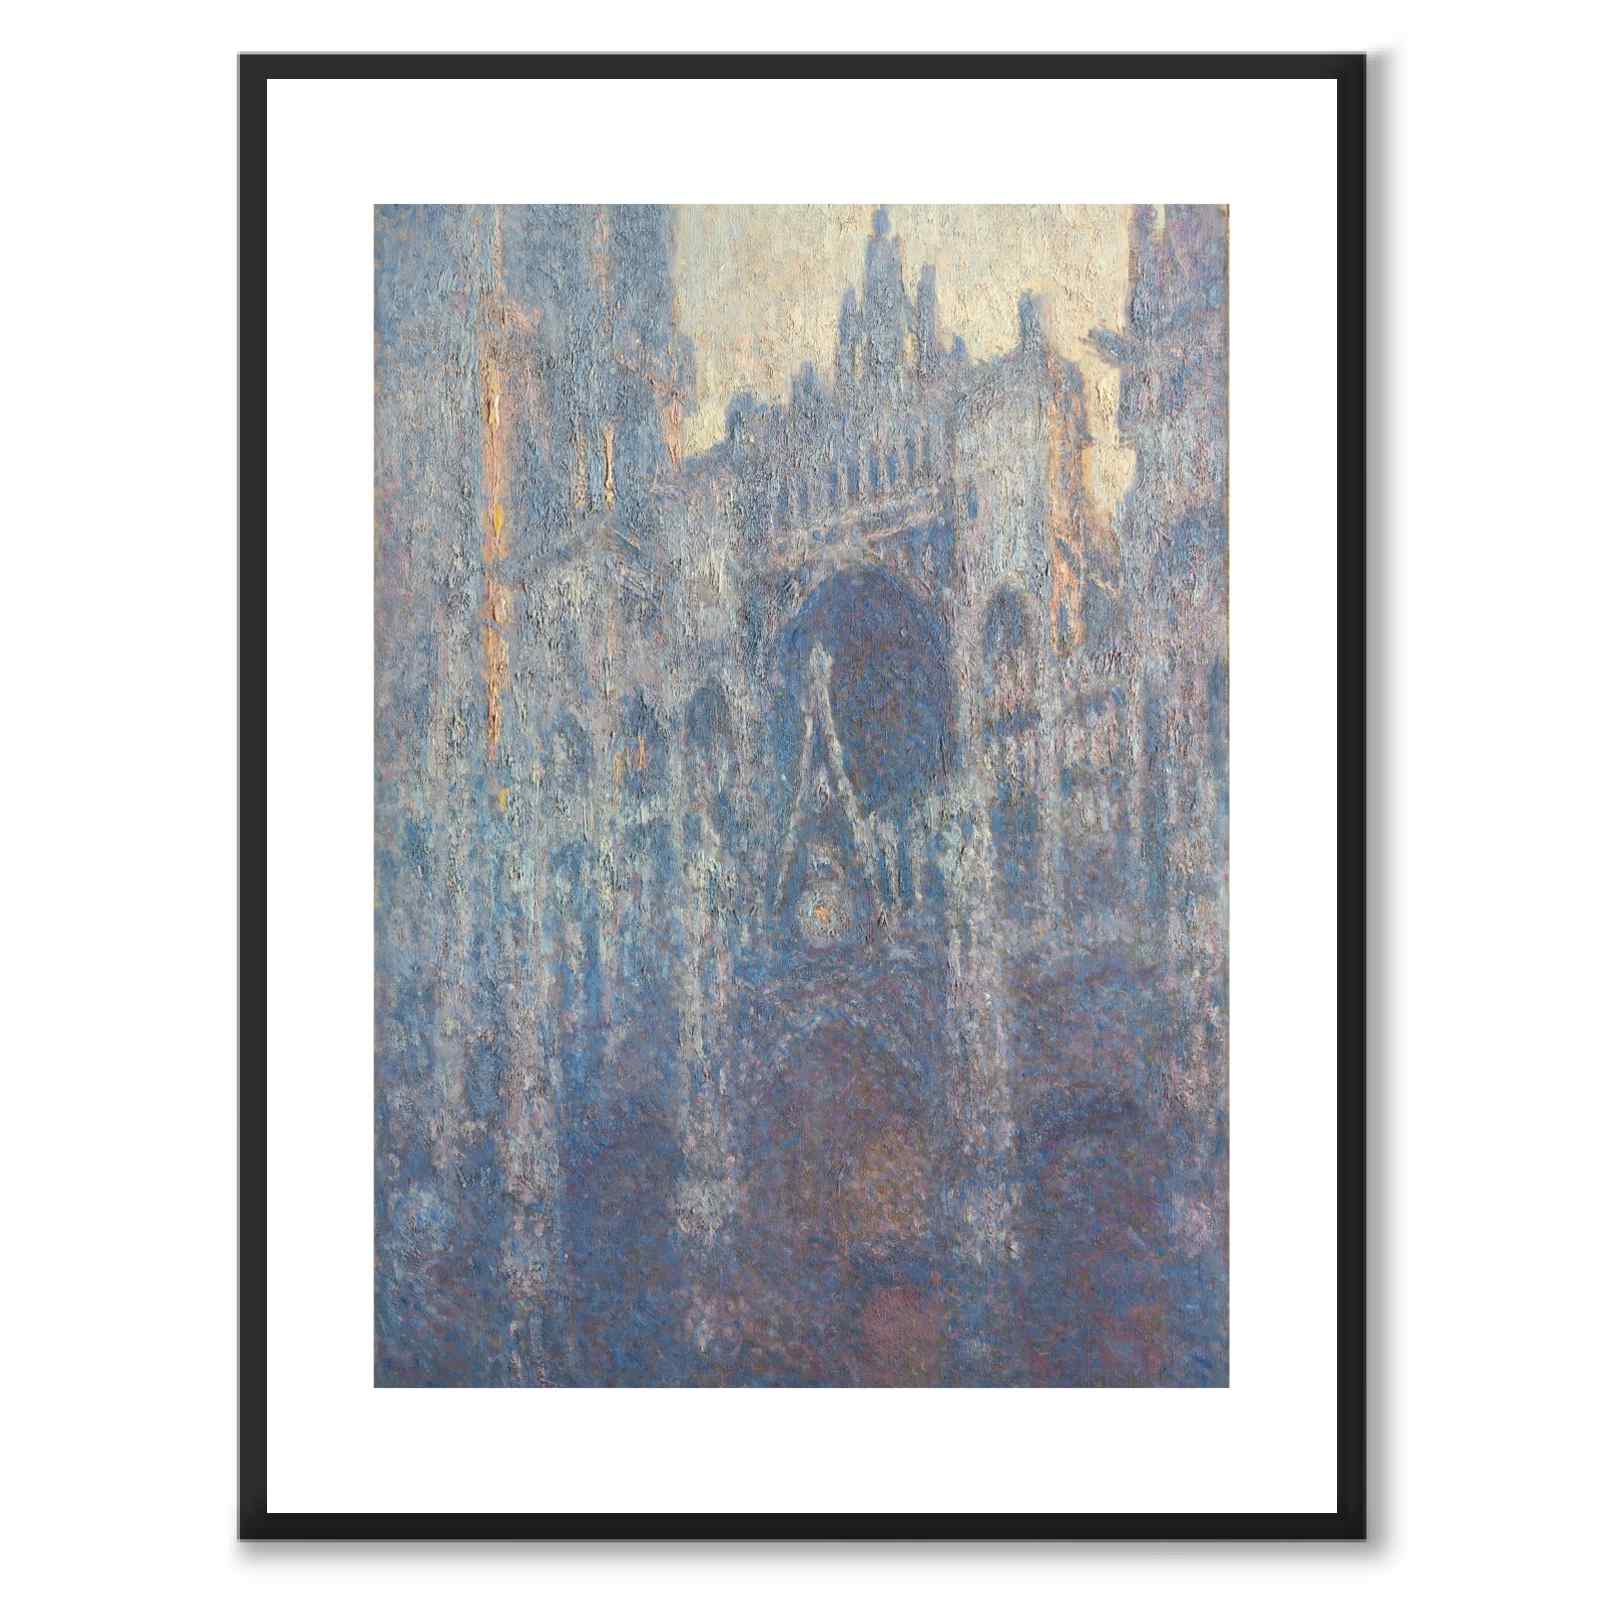 The Portal of Rouen Cathedral in Morning Light - Poster